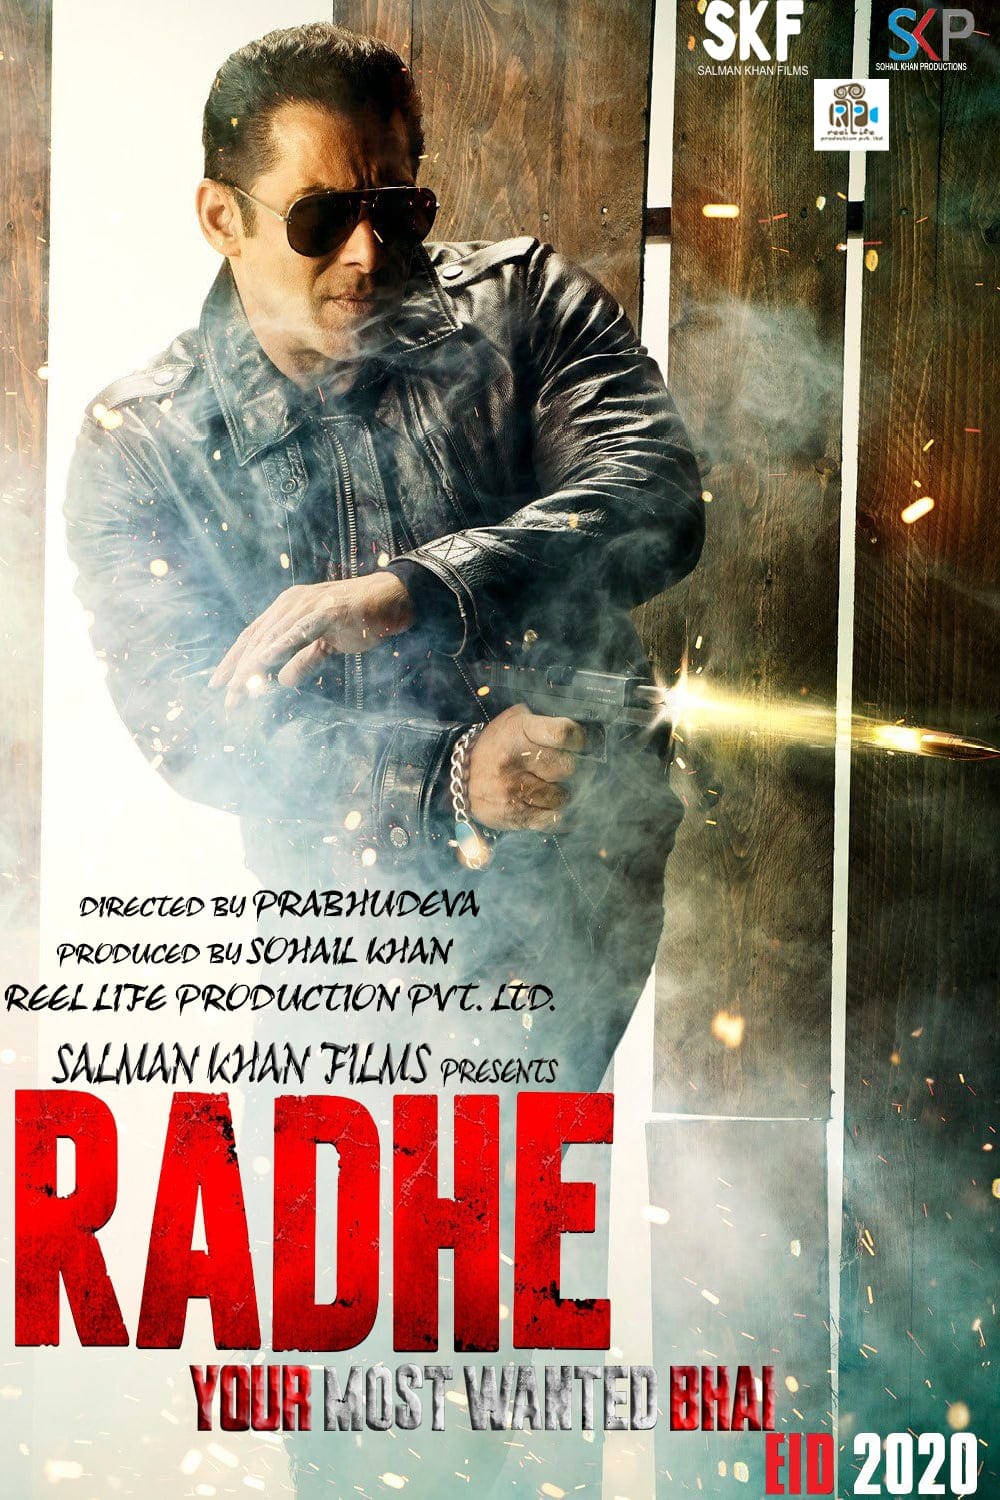 Poster for the movie "Radhe: Your Most Wanted Bhai"